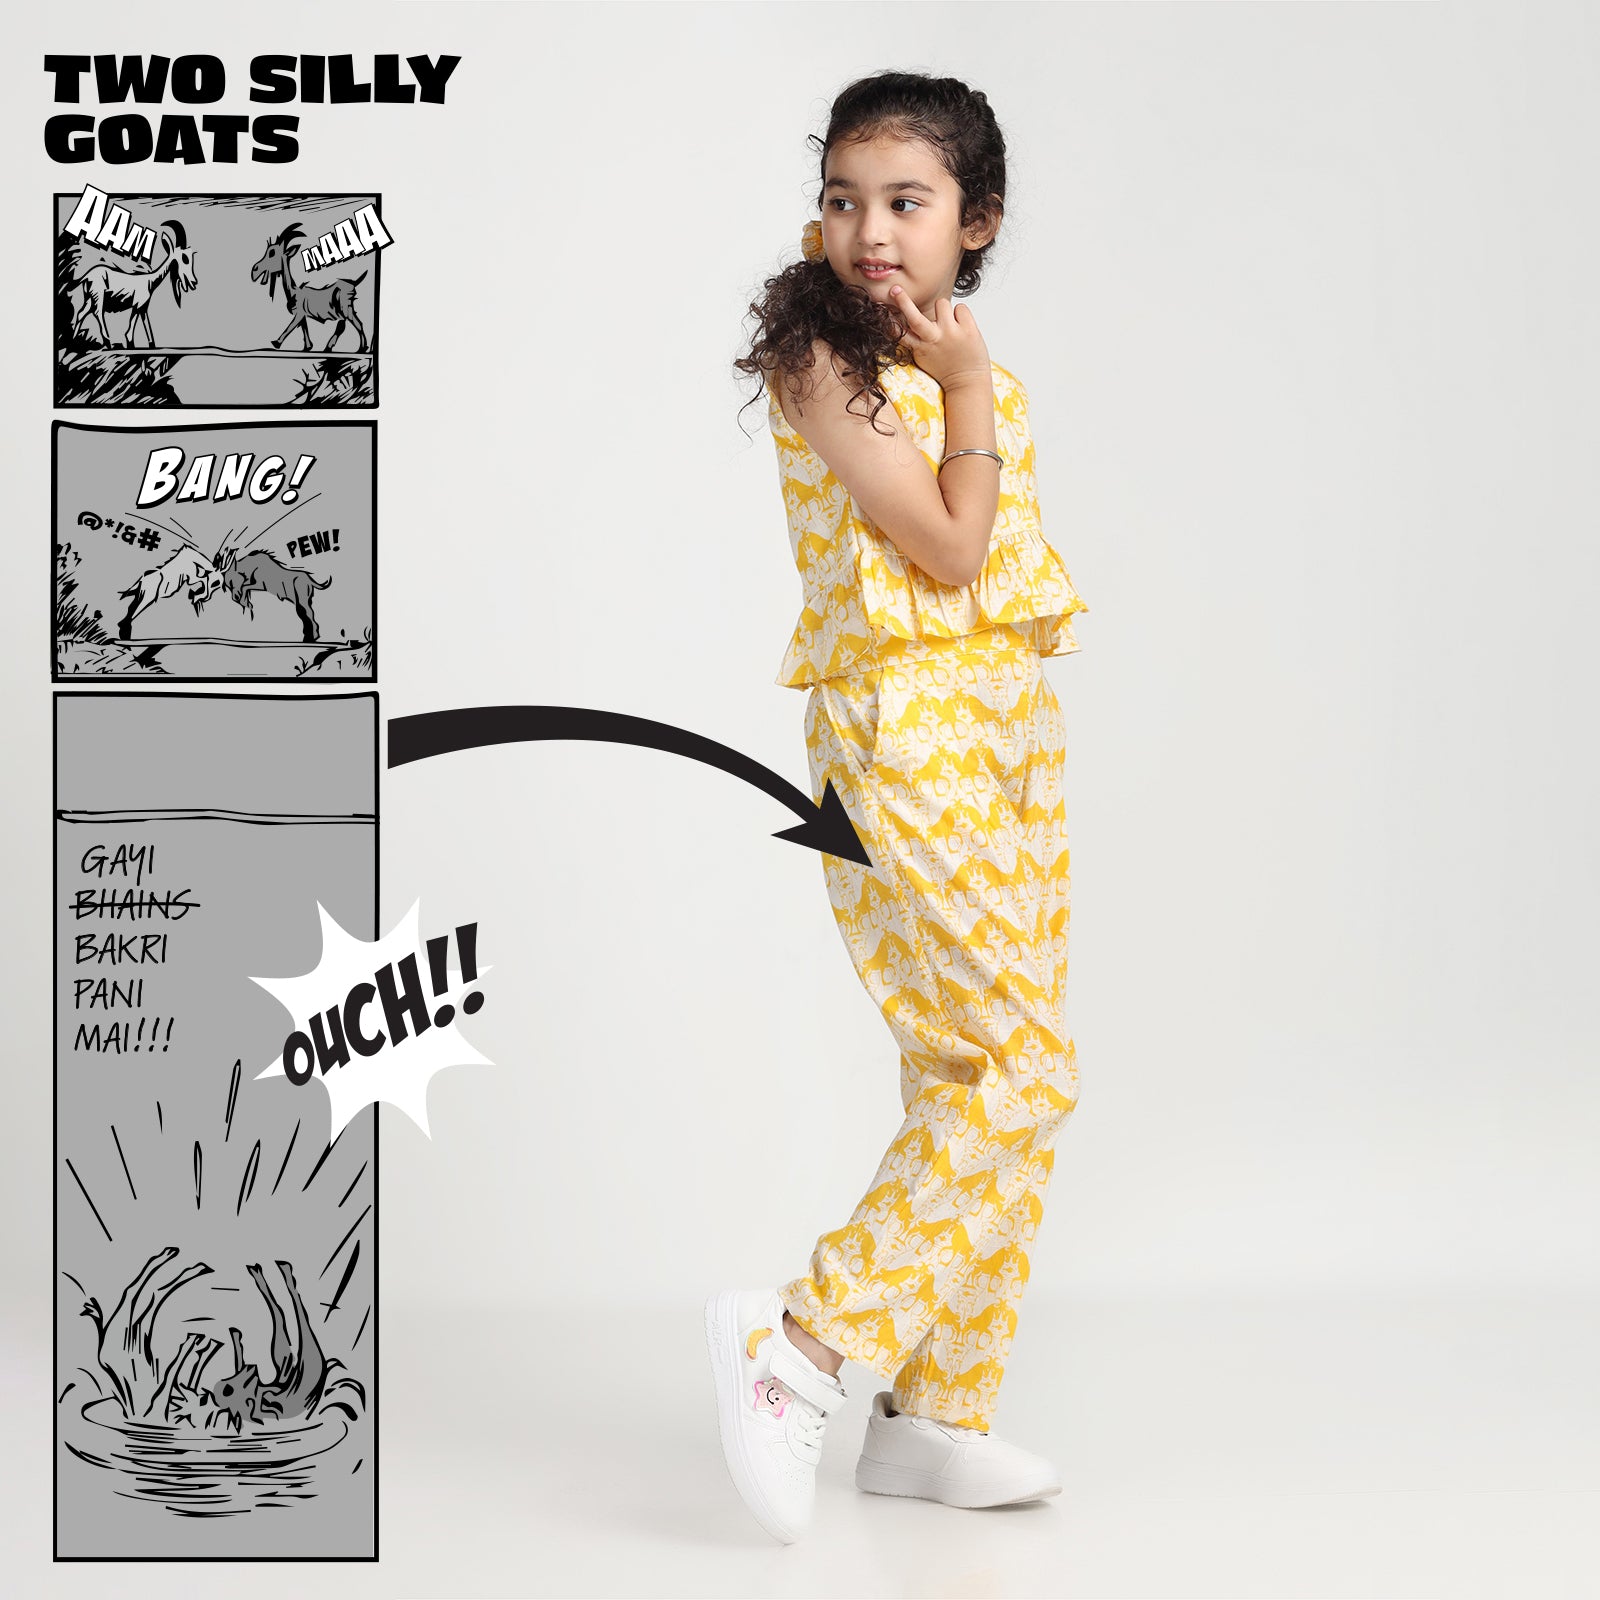 Cotton Crop Top & Pants For Girls with Two Silly Goats Print